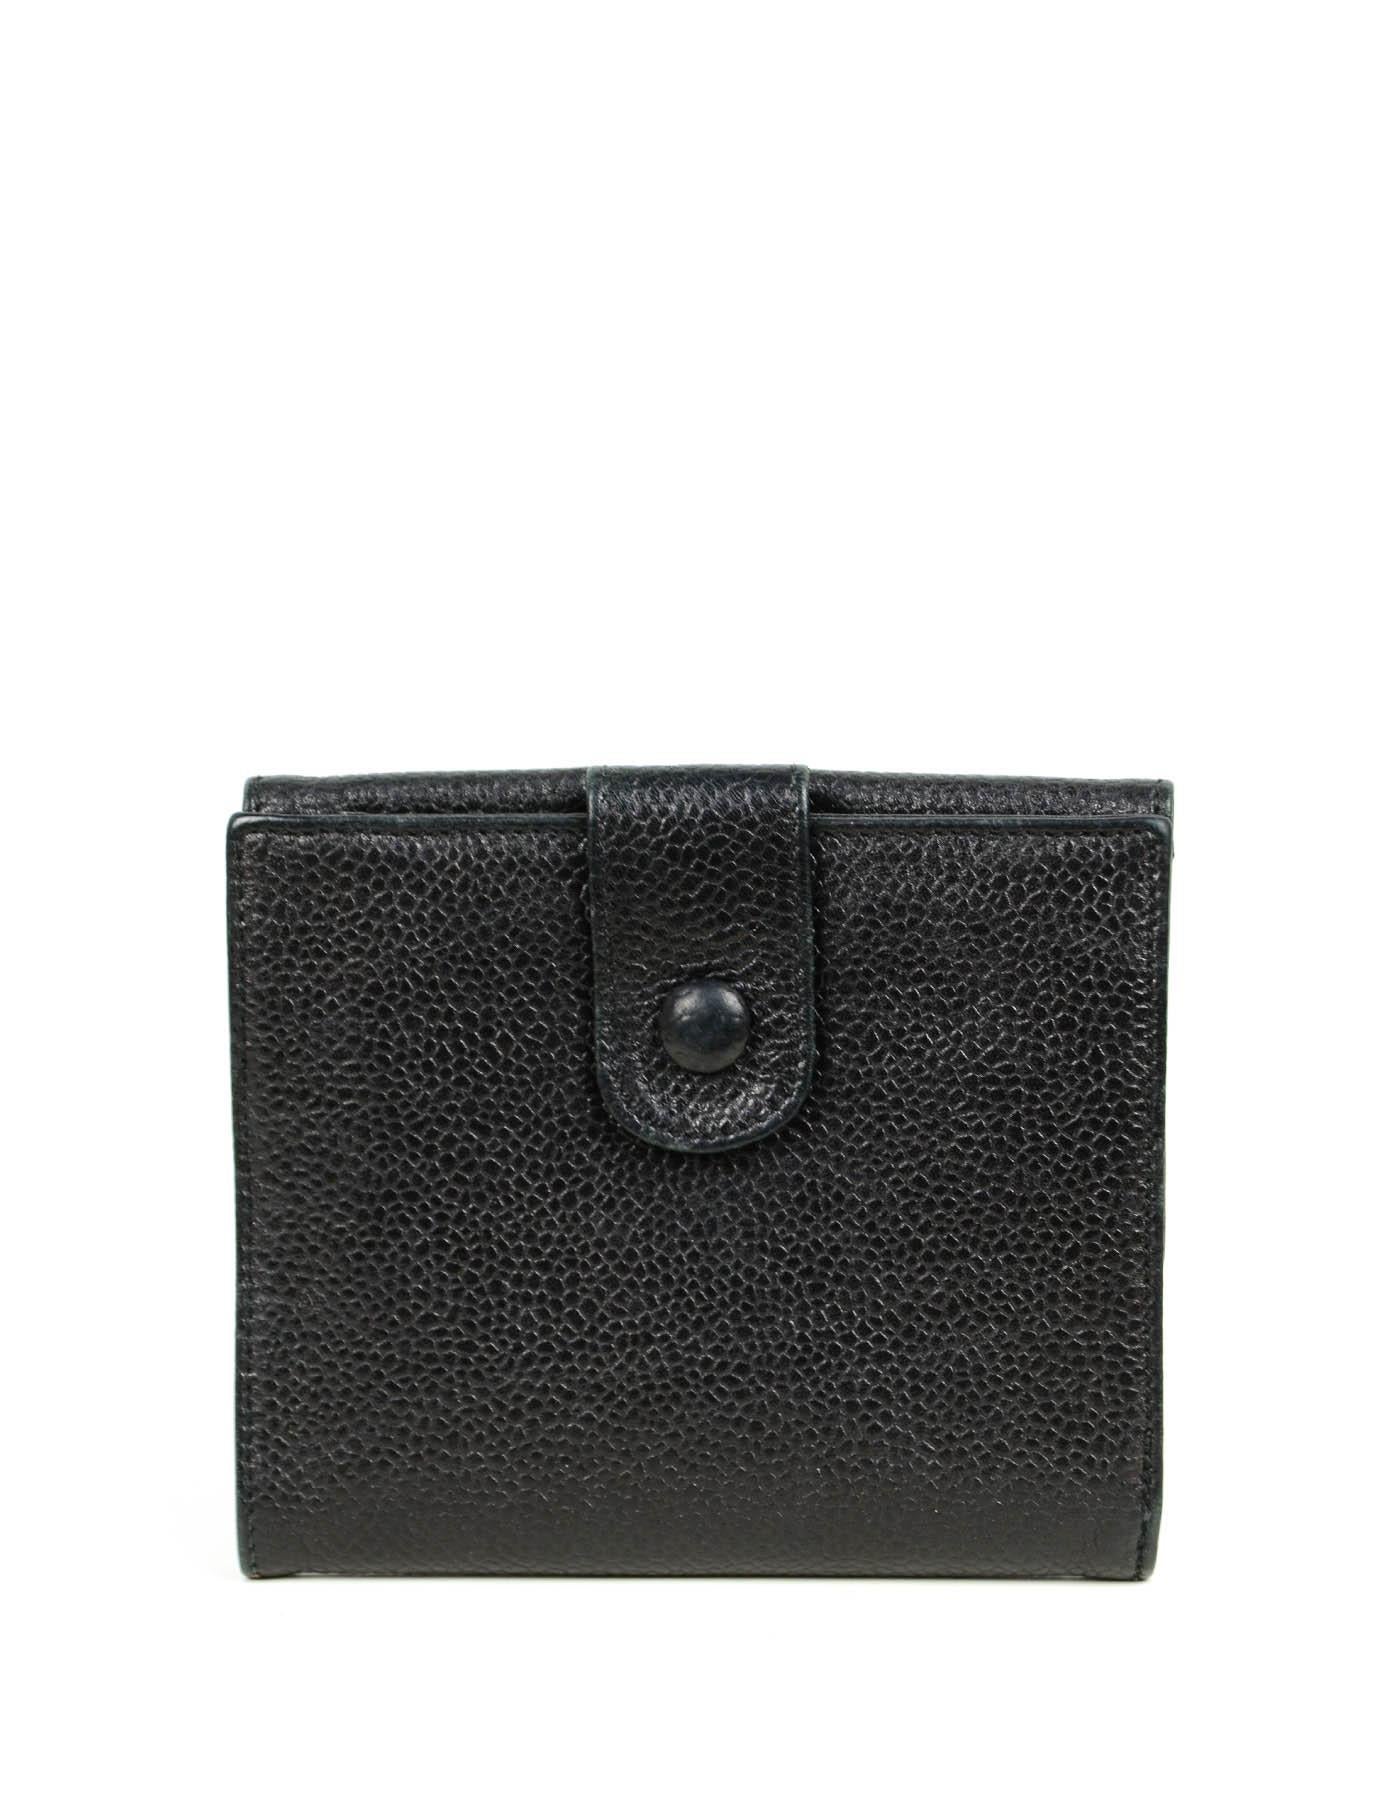 Chanel Black Caviar Leather Timeless CC Compact Wallet In Excellent Condition In New York, NY